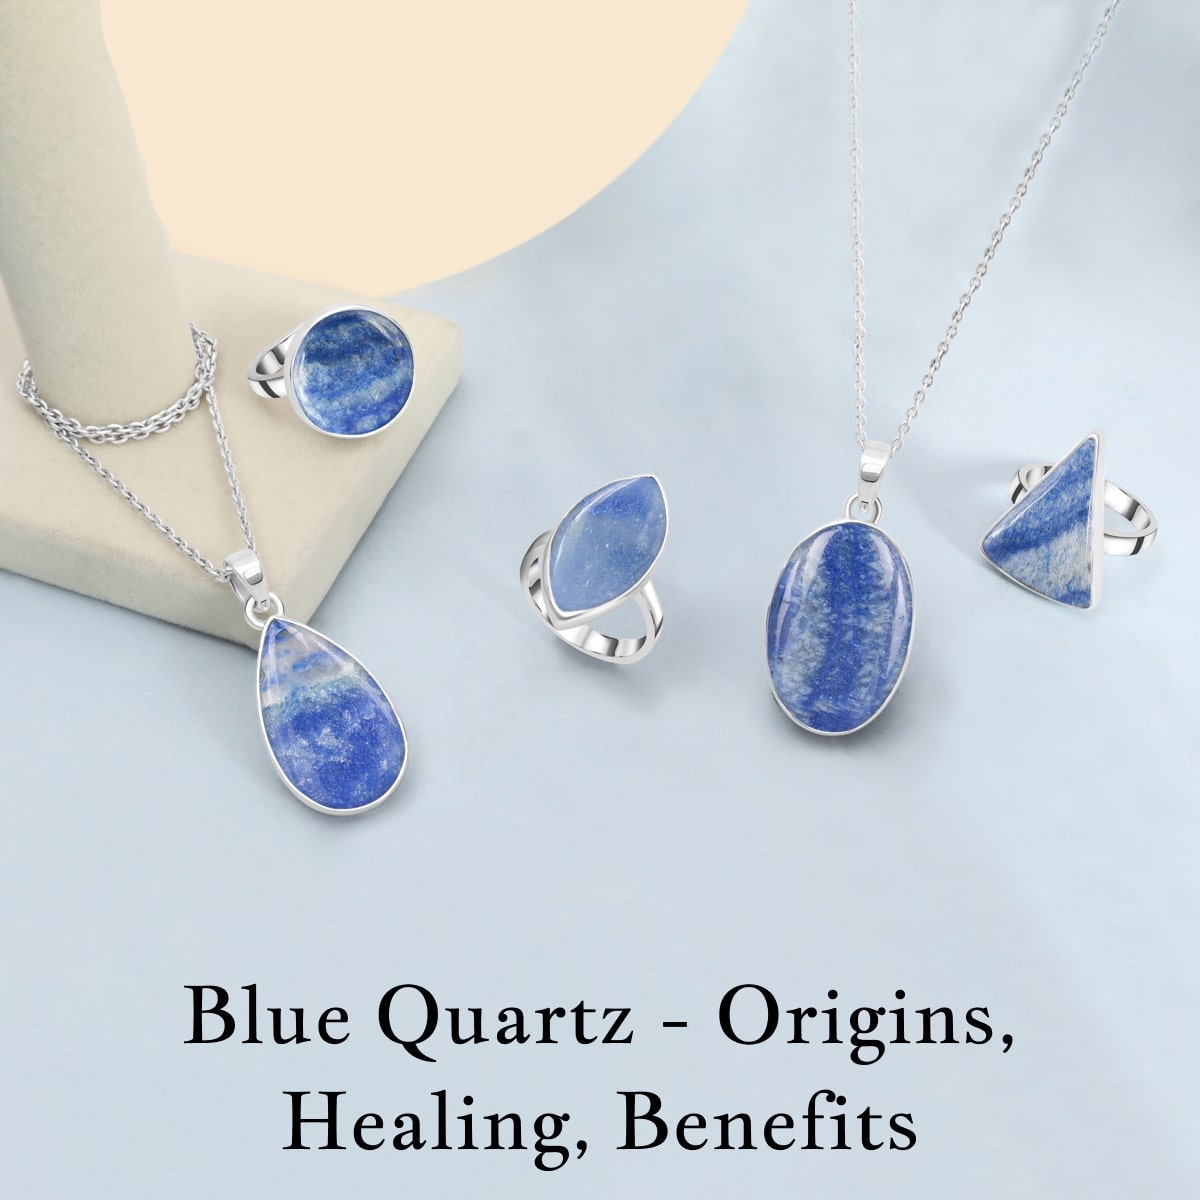 Blue Quartz Meaning, History, Healing Properties, Benefits and Cleansing